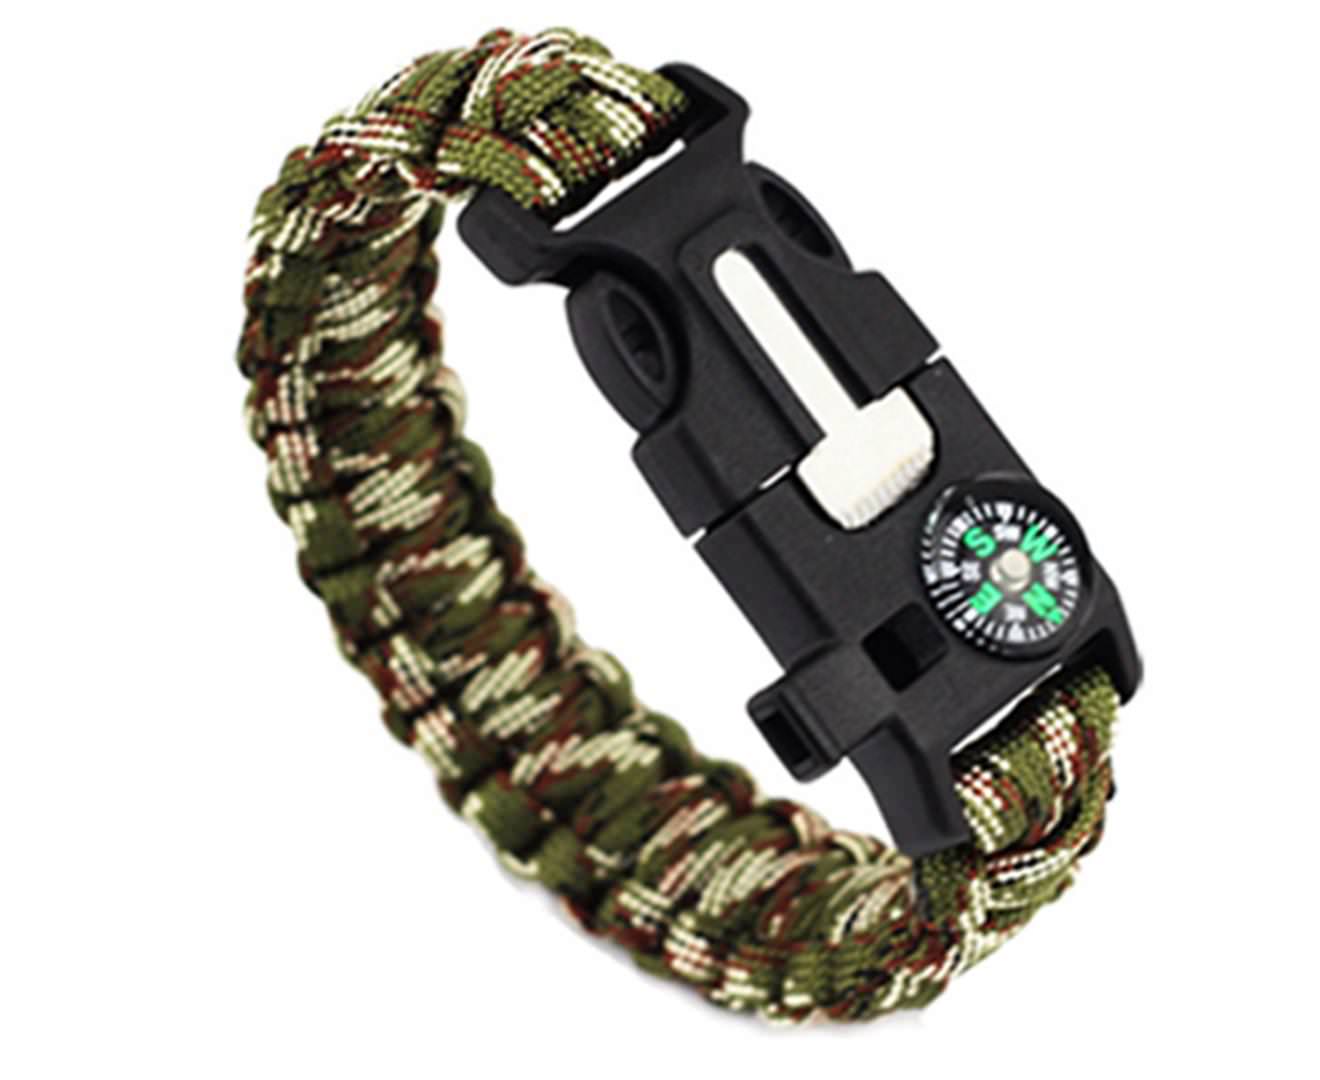 Outdoor Survival Paracord Bracelet With Compass Fire Starter And Emergency Whistle